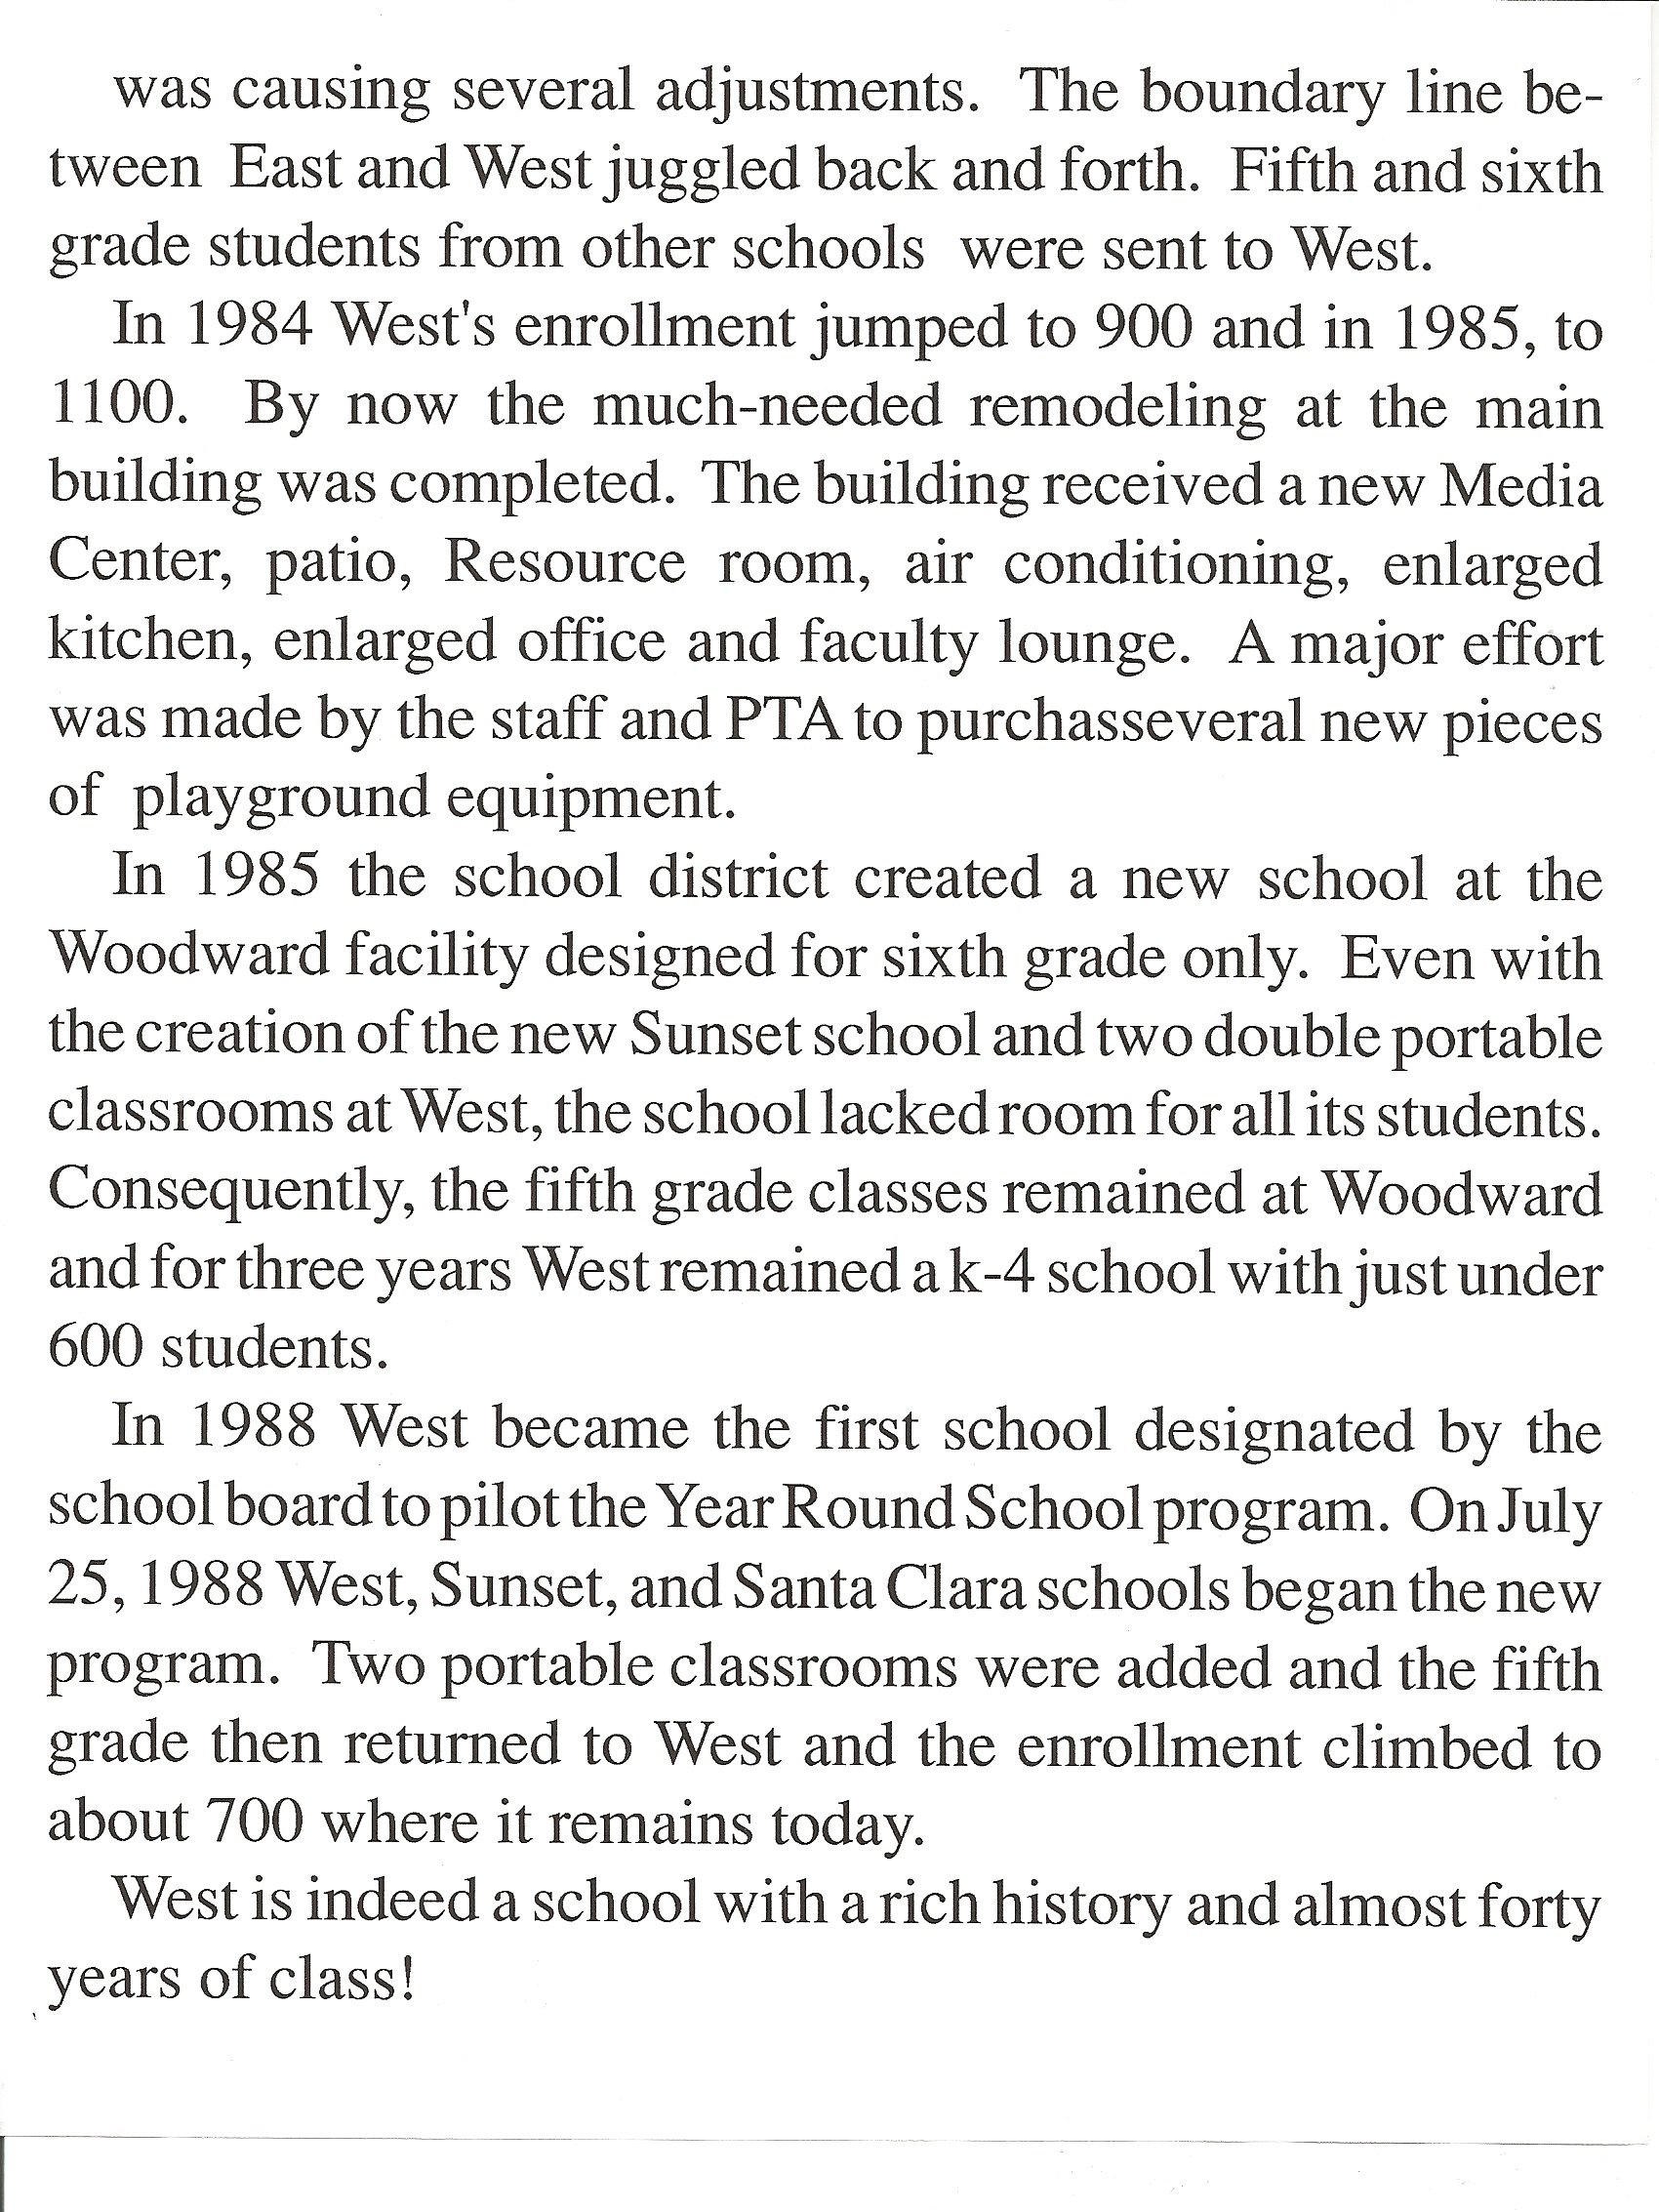 Page 3 of a brief history of West Elementary School